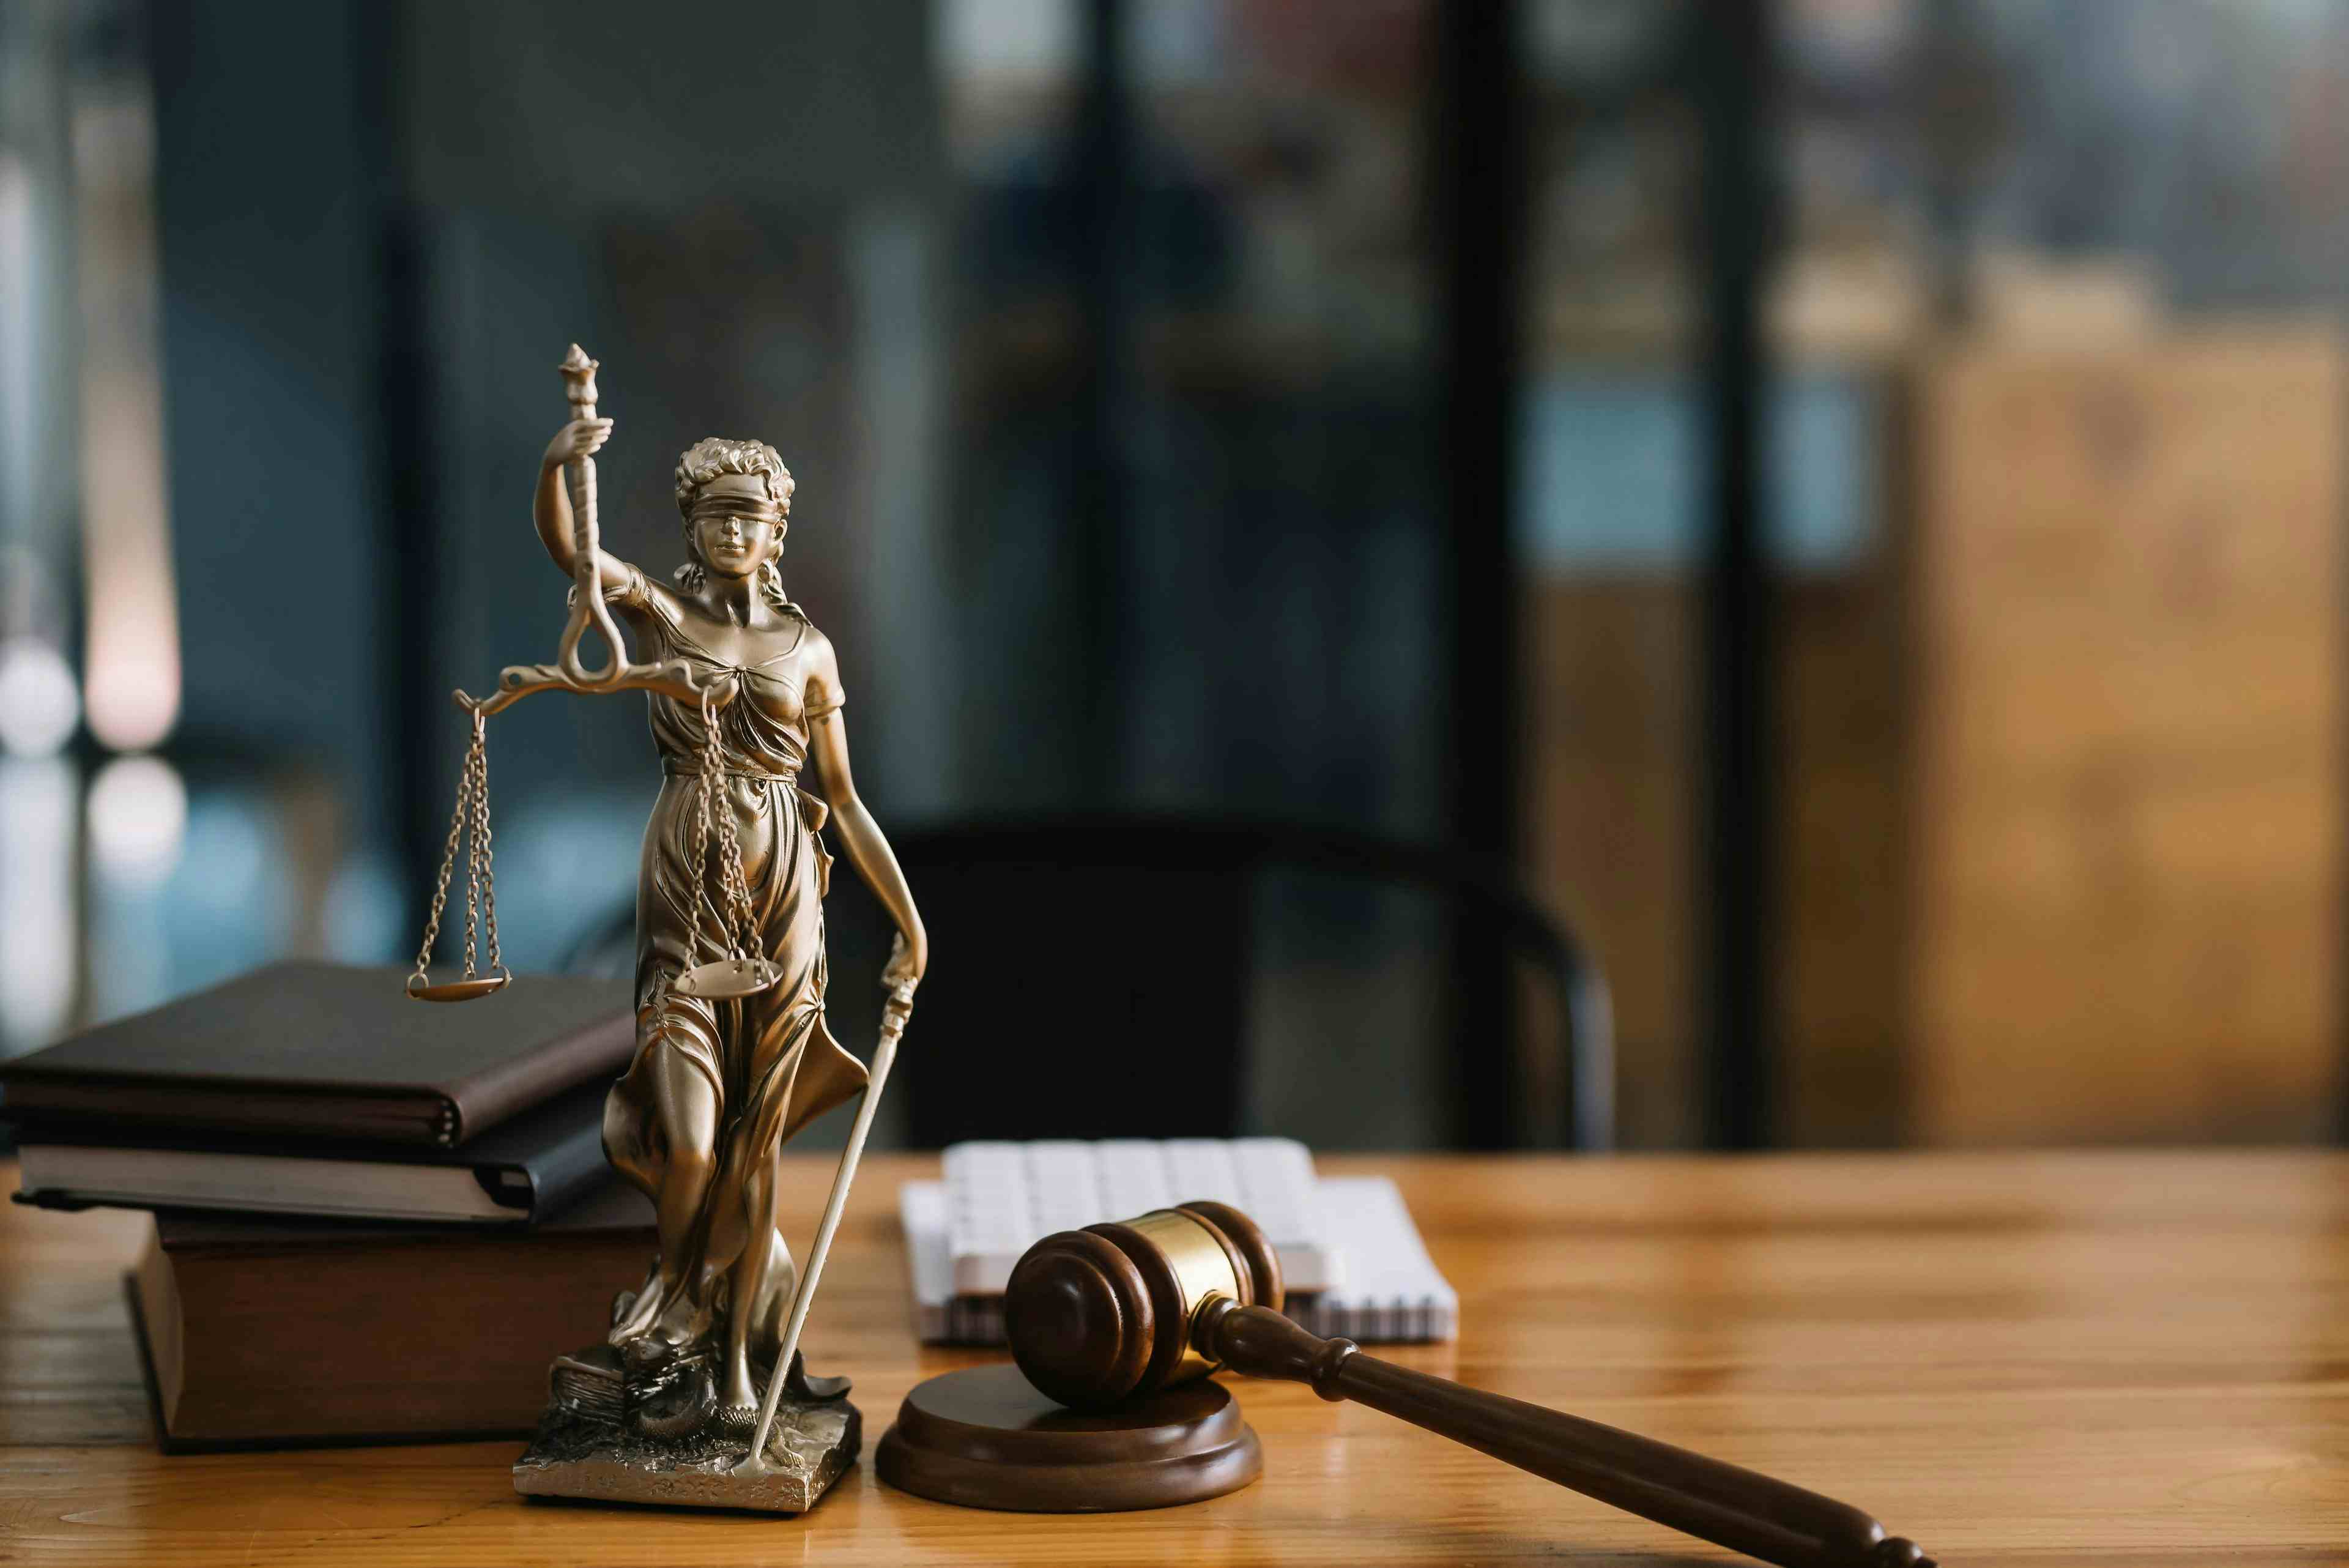 A statue of lady justice next to a gavel